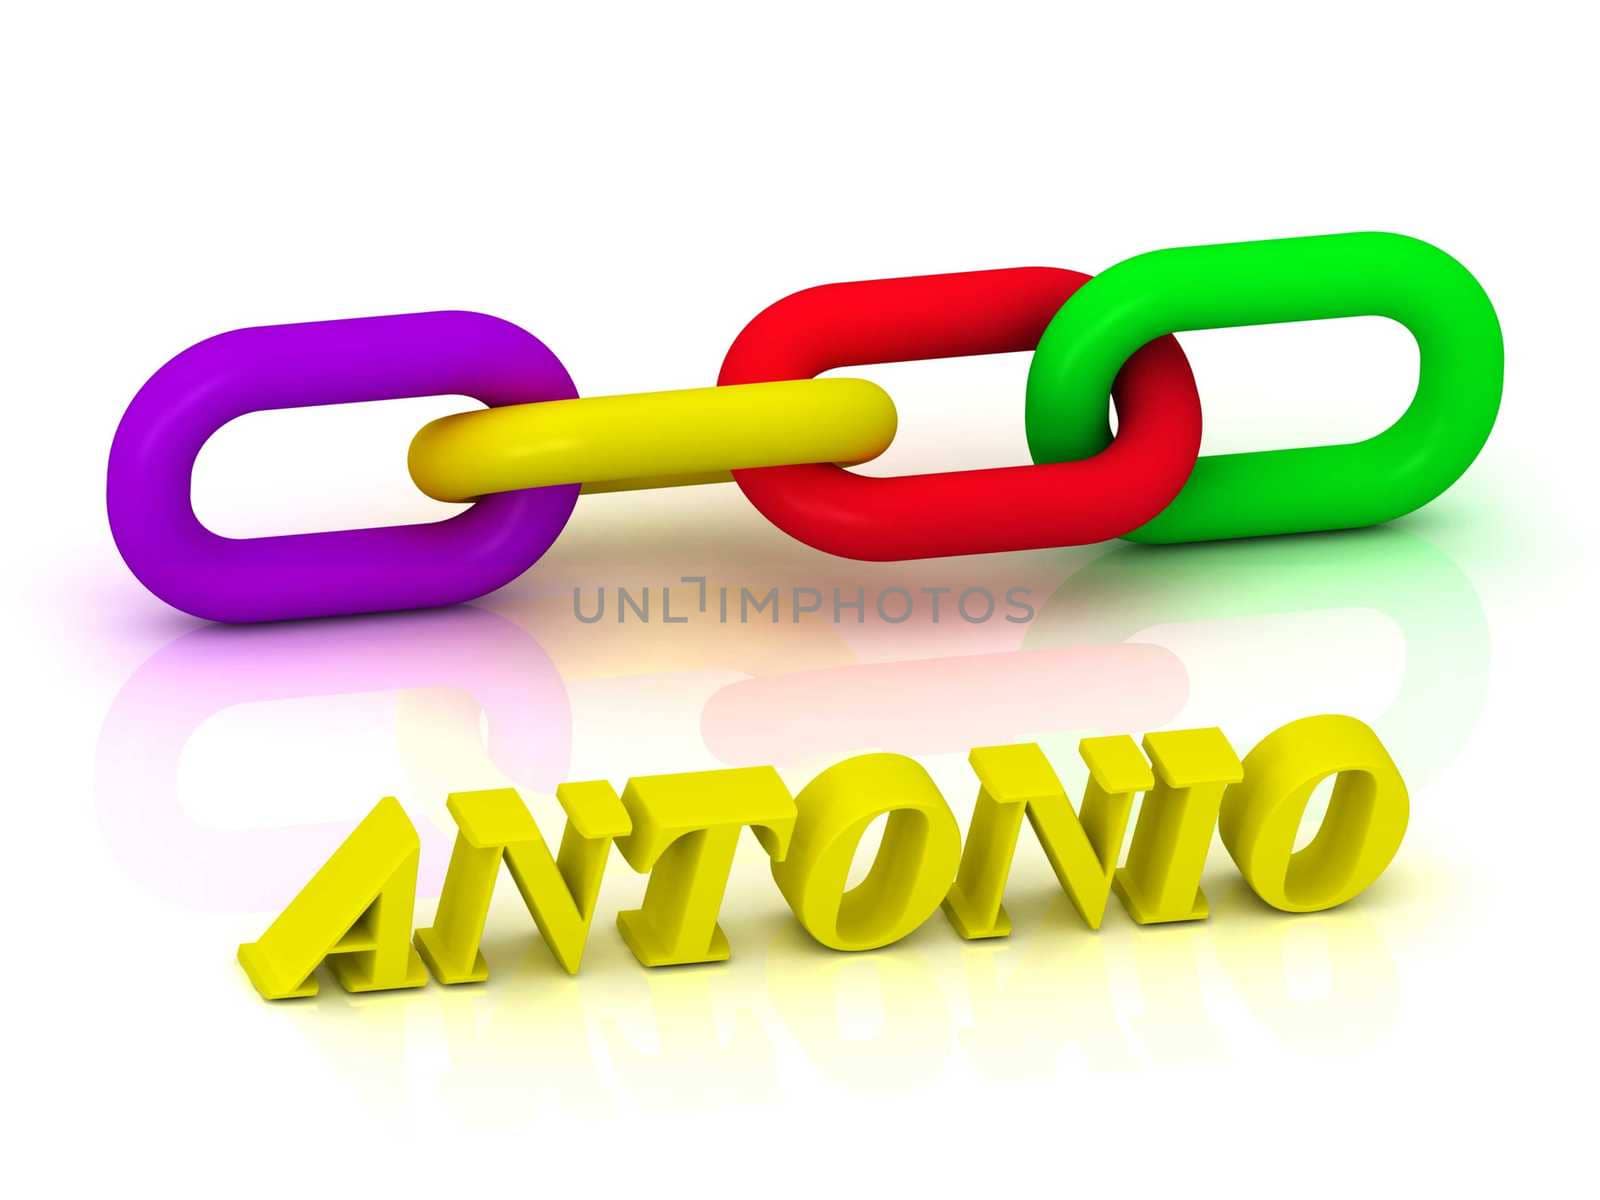 ANTONIO- Name and Family of bright yellow letters by GreenMost